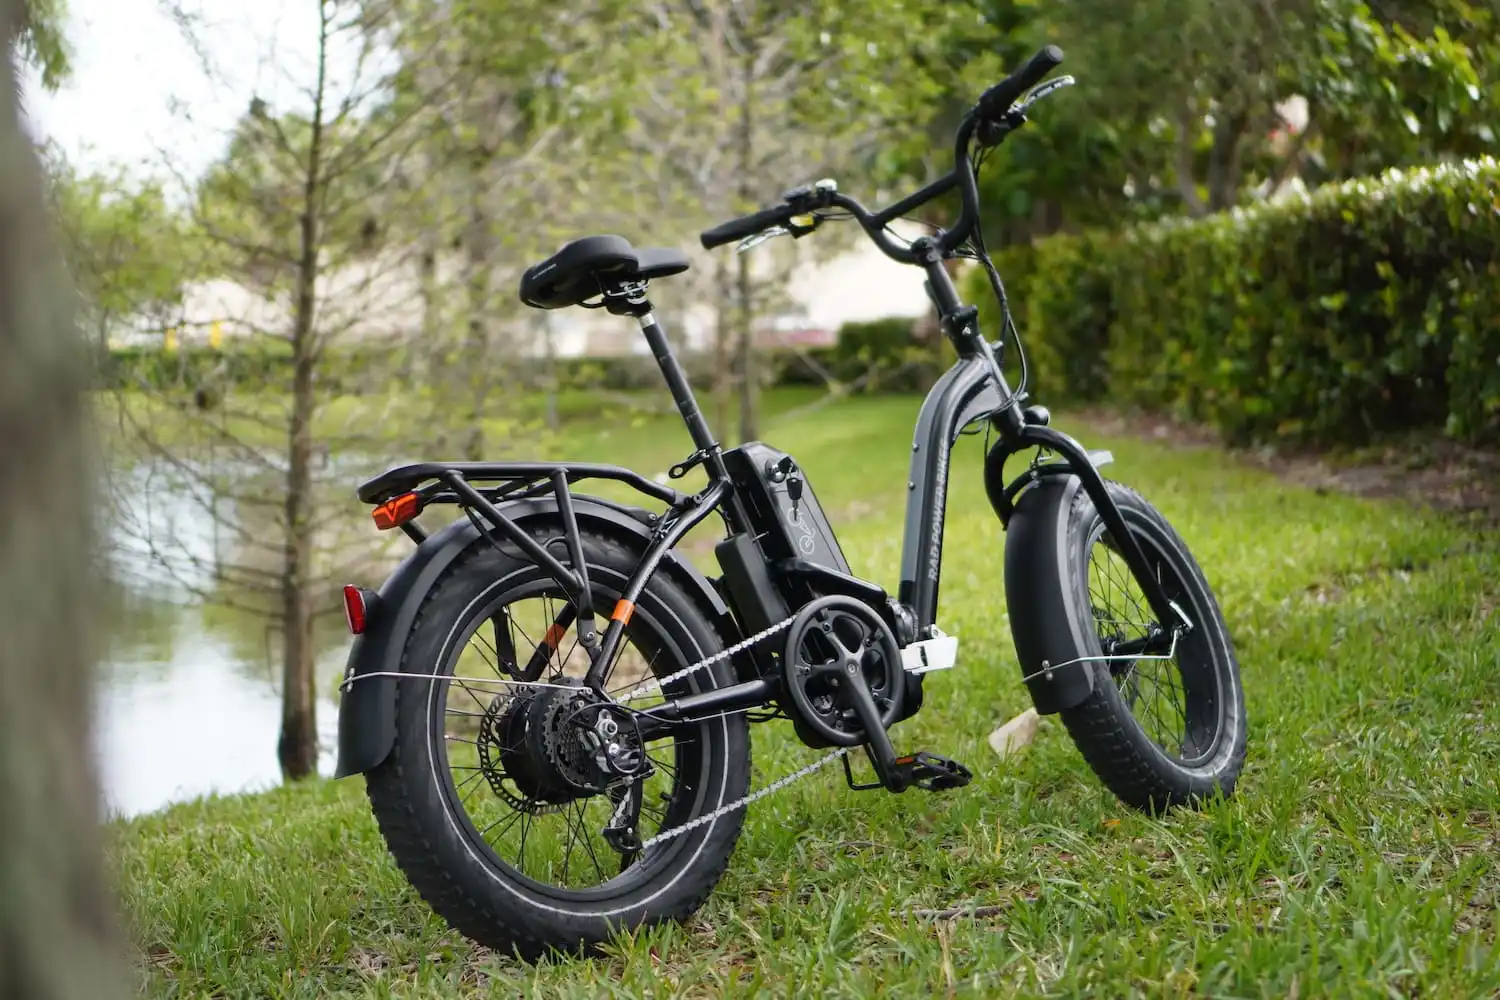 Rad Power Bikes Announces Price Reductions Across All Electric Bike Models